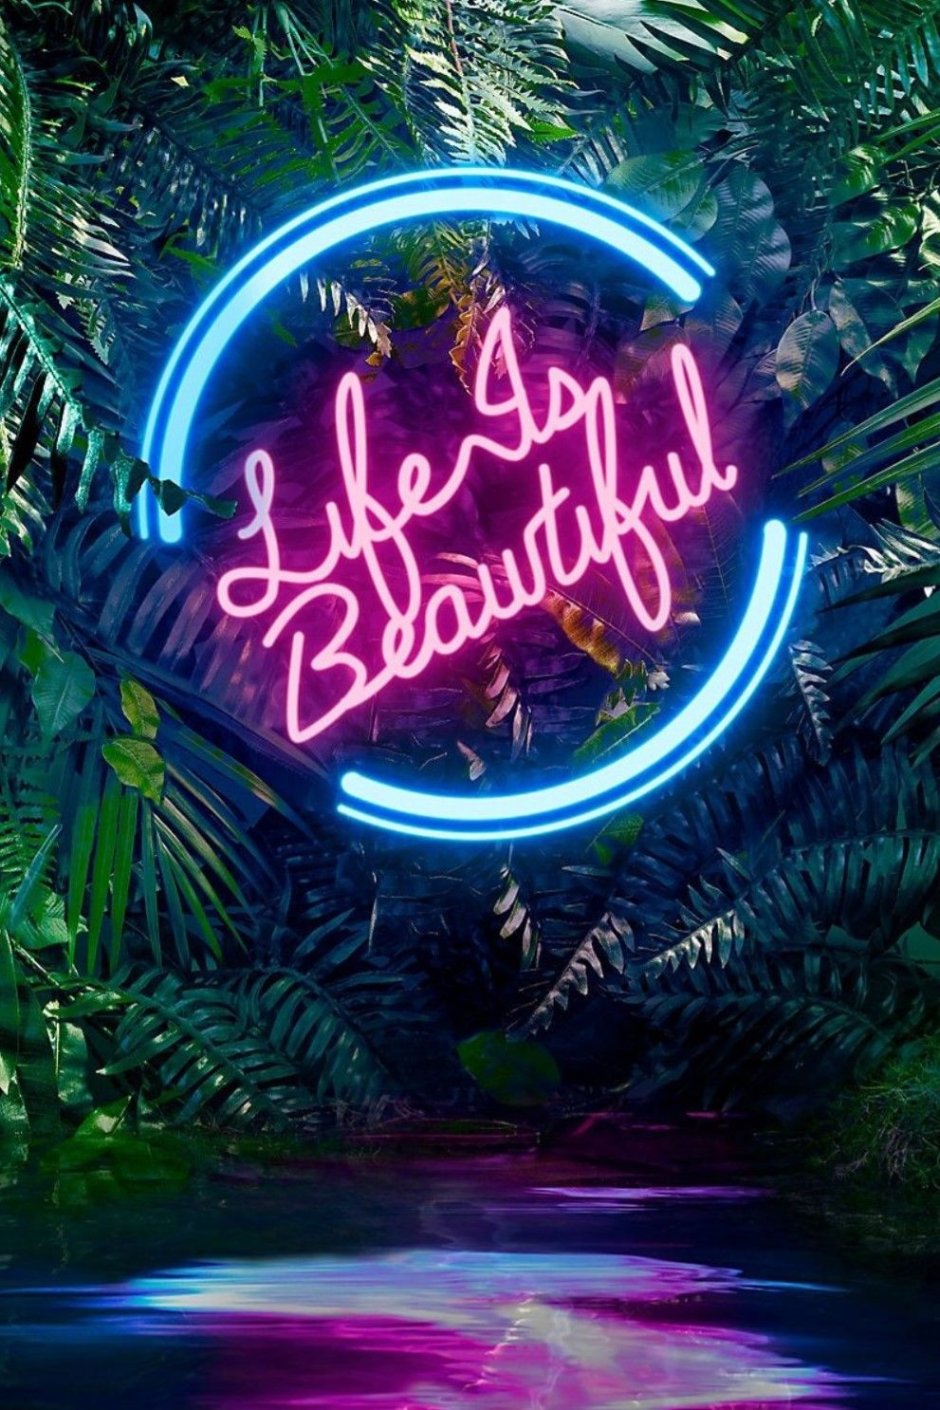 Beauty neon signs